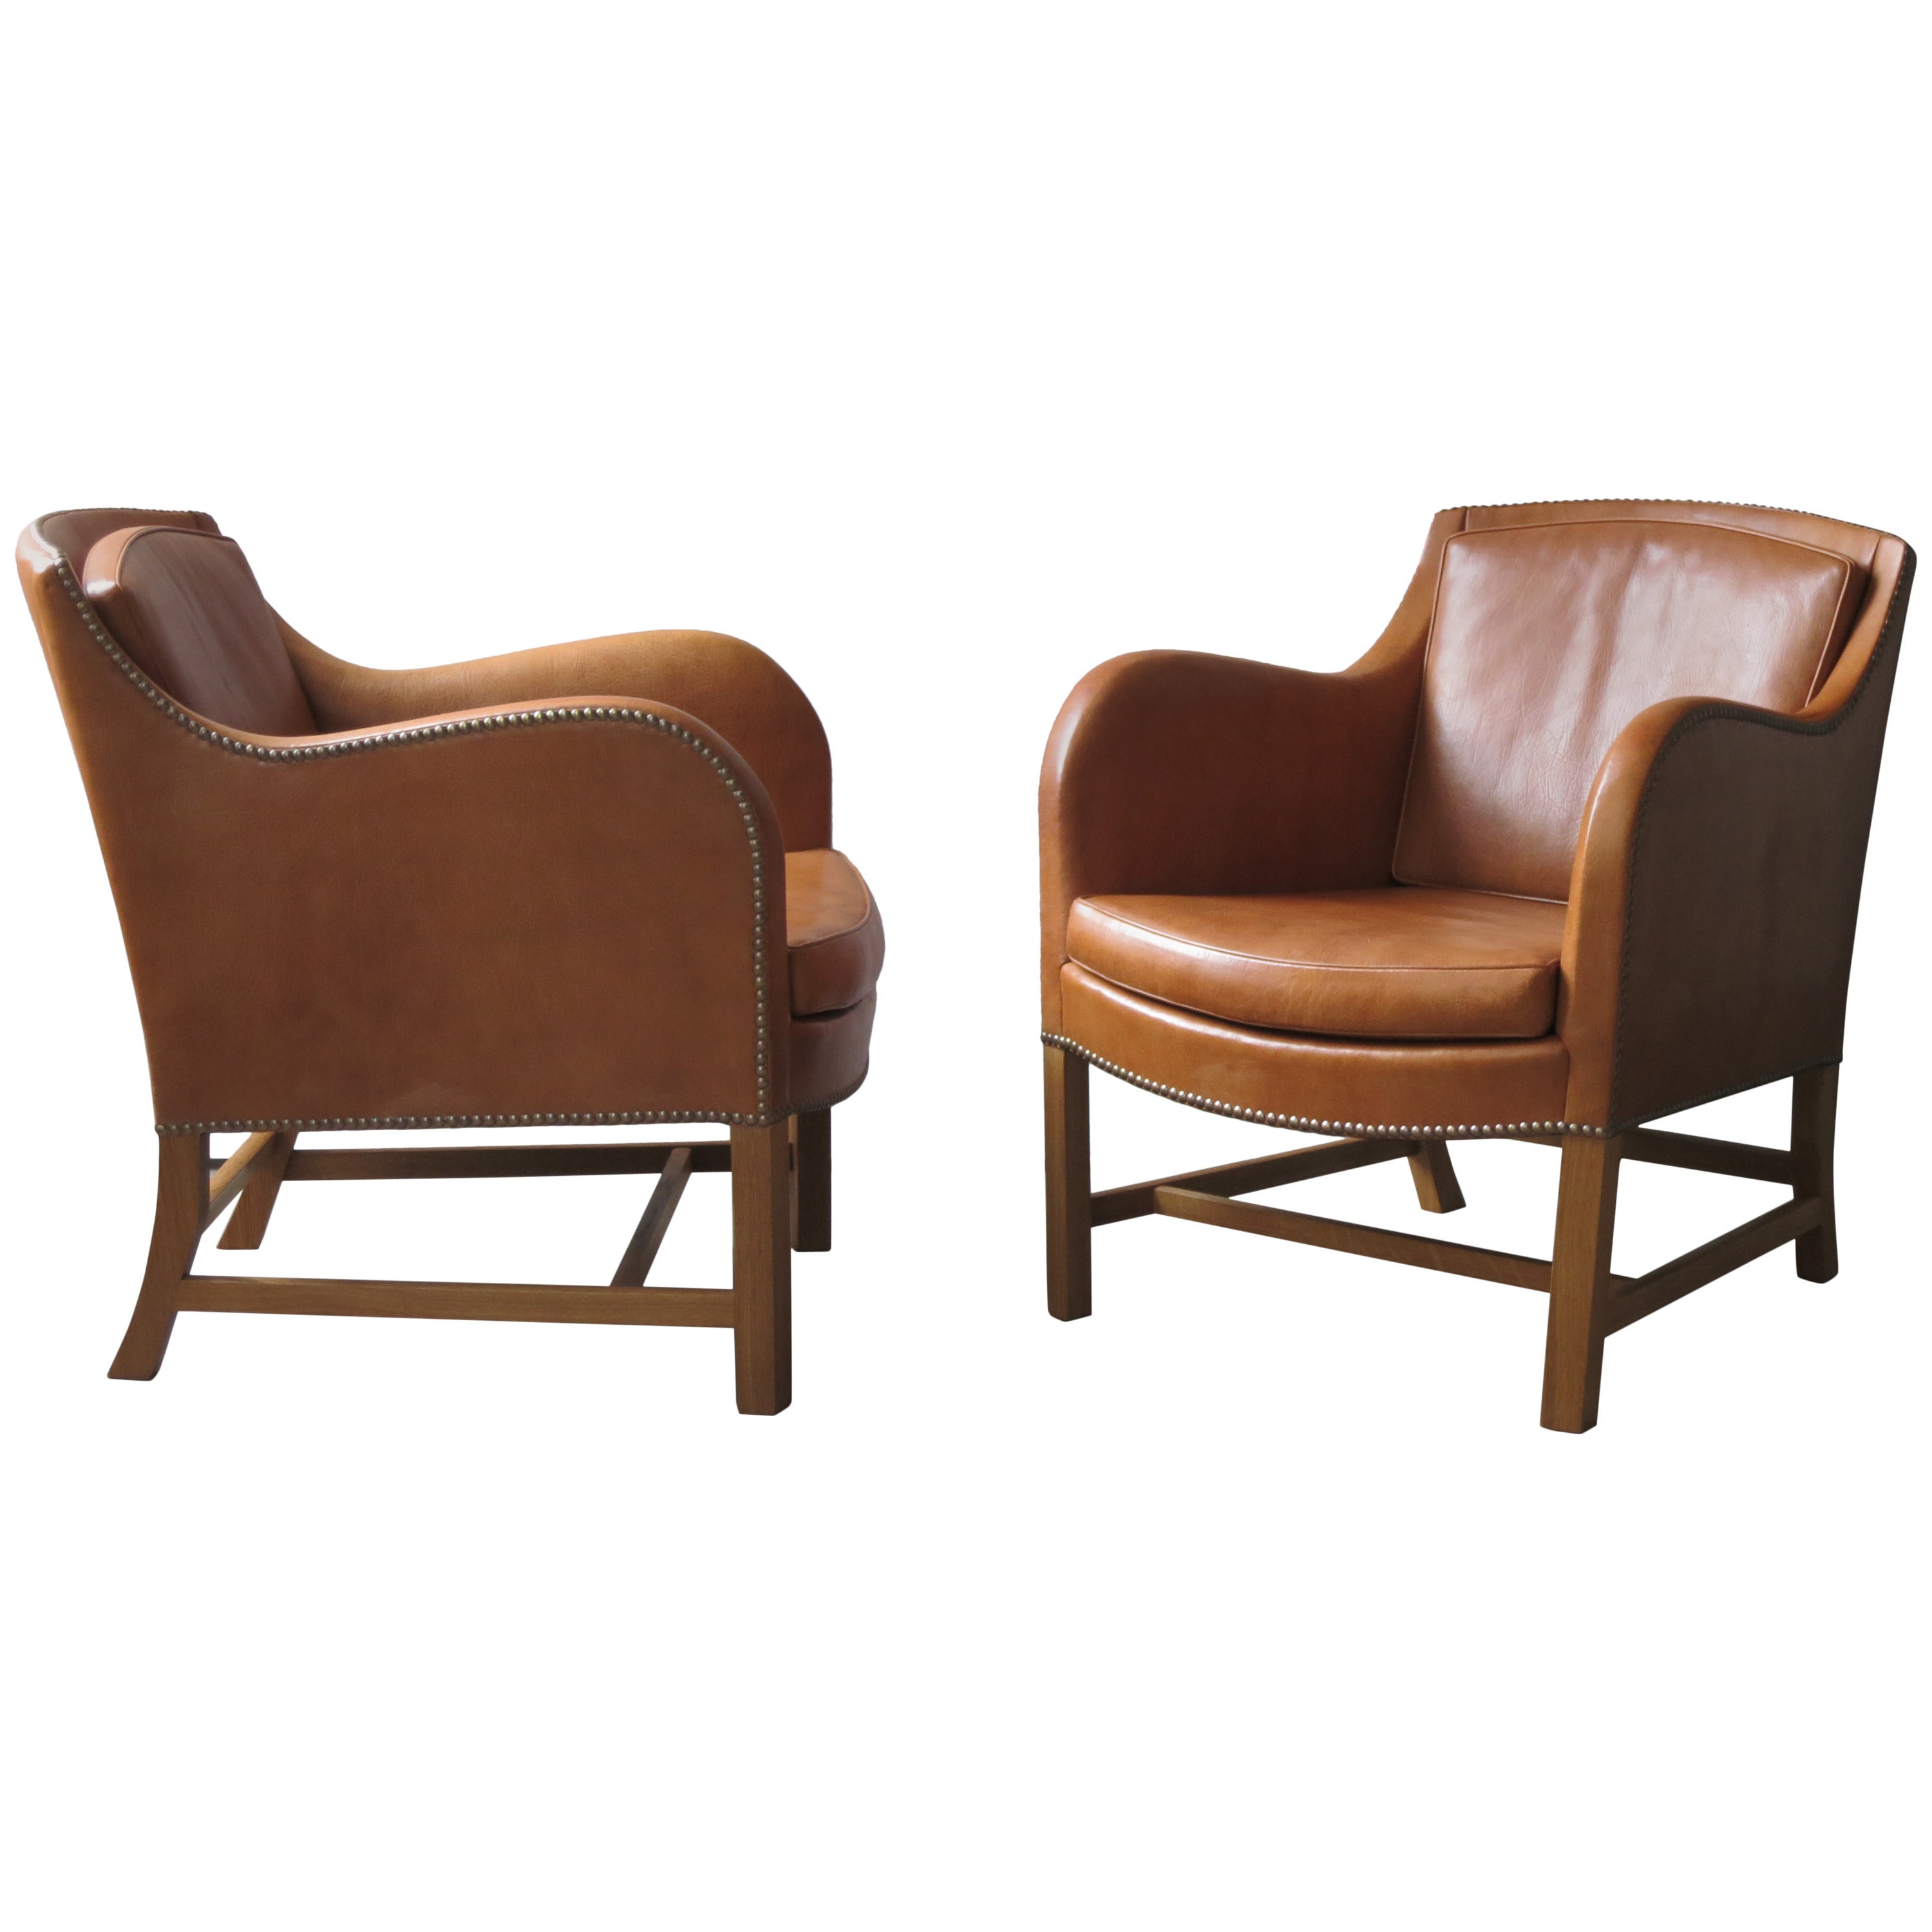 Pair of "Mix" Chairs in Nigerian Goatskin with Brass Nailheads by Kaare Klint For Sale